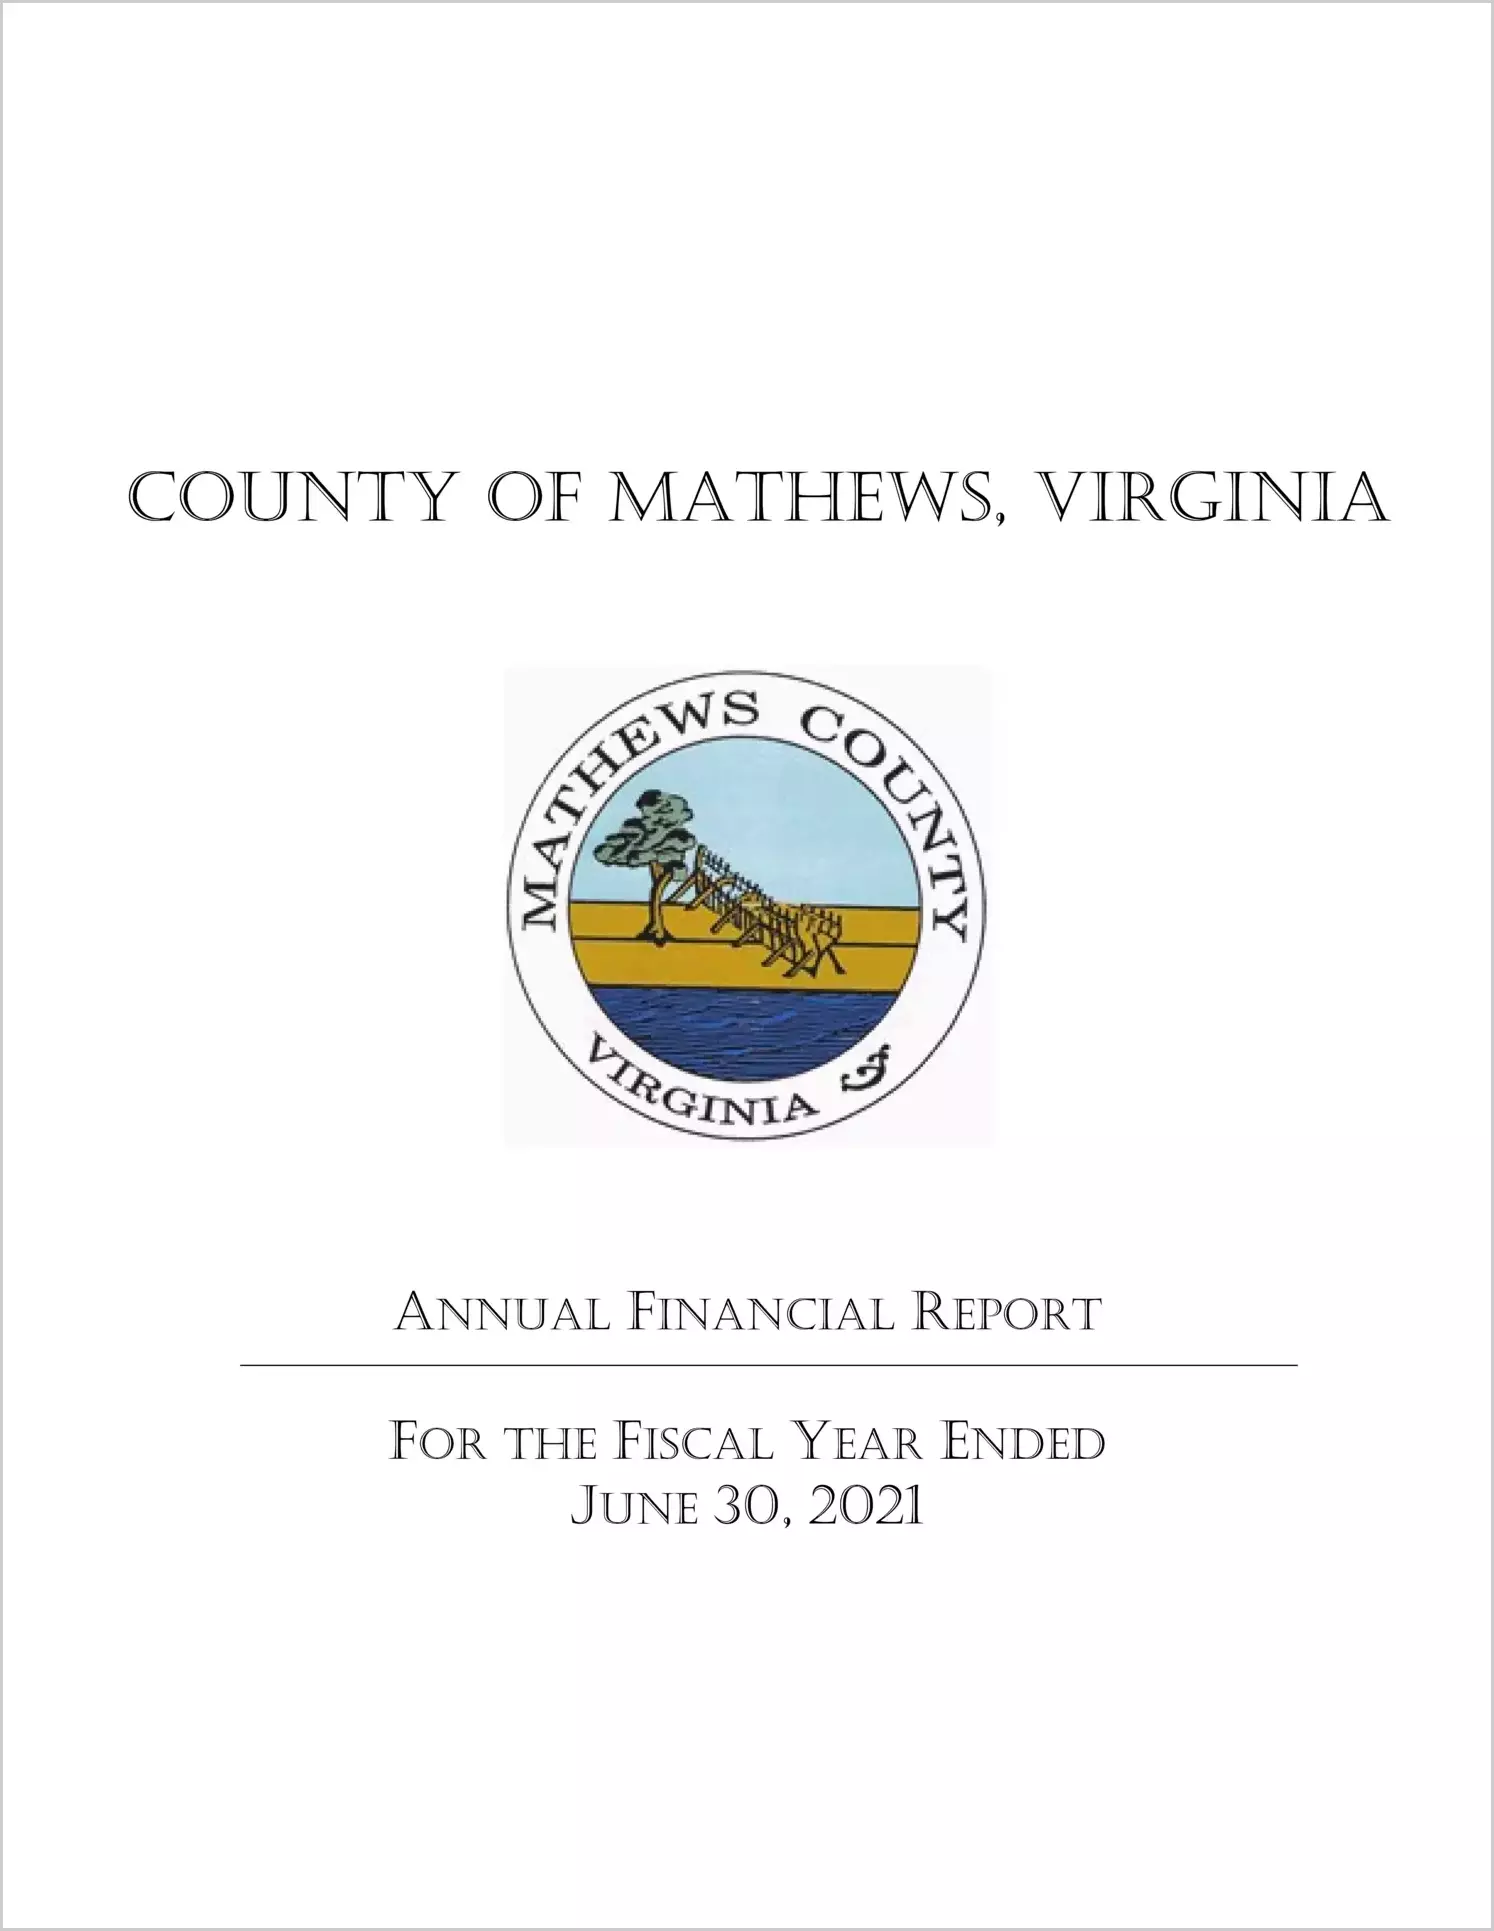 2021 Annual Financial Report for County of Mathews